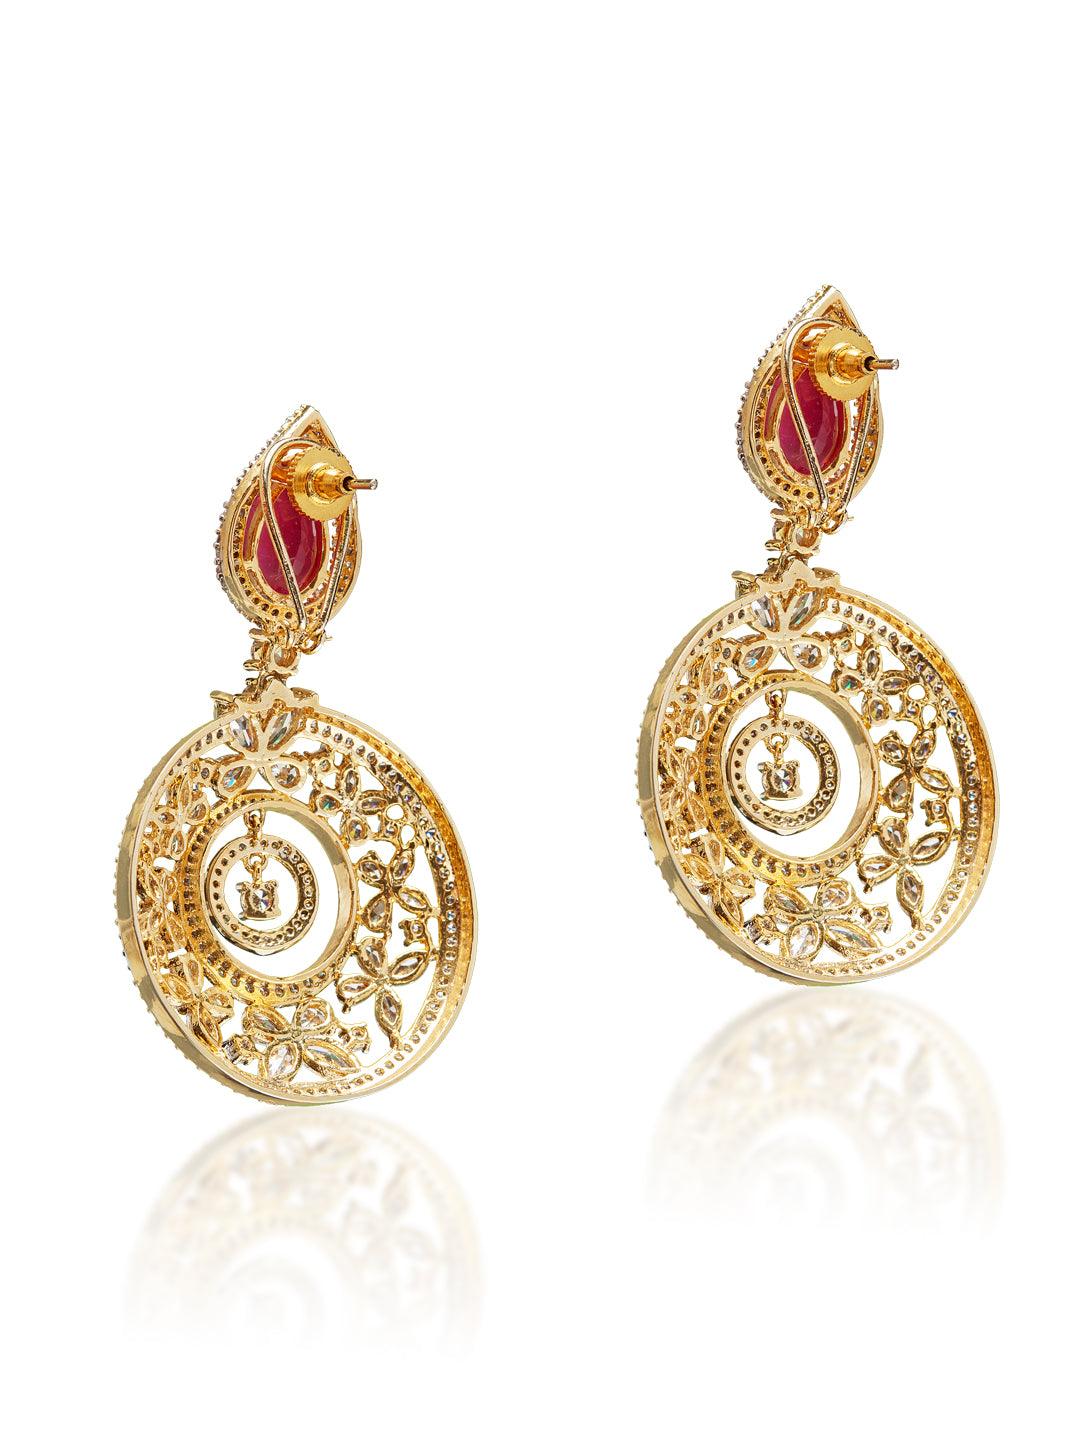 Bling In The Middle Earrings - Curio Cottage 